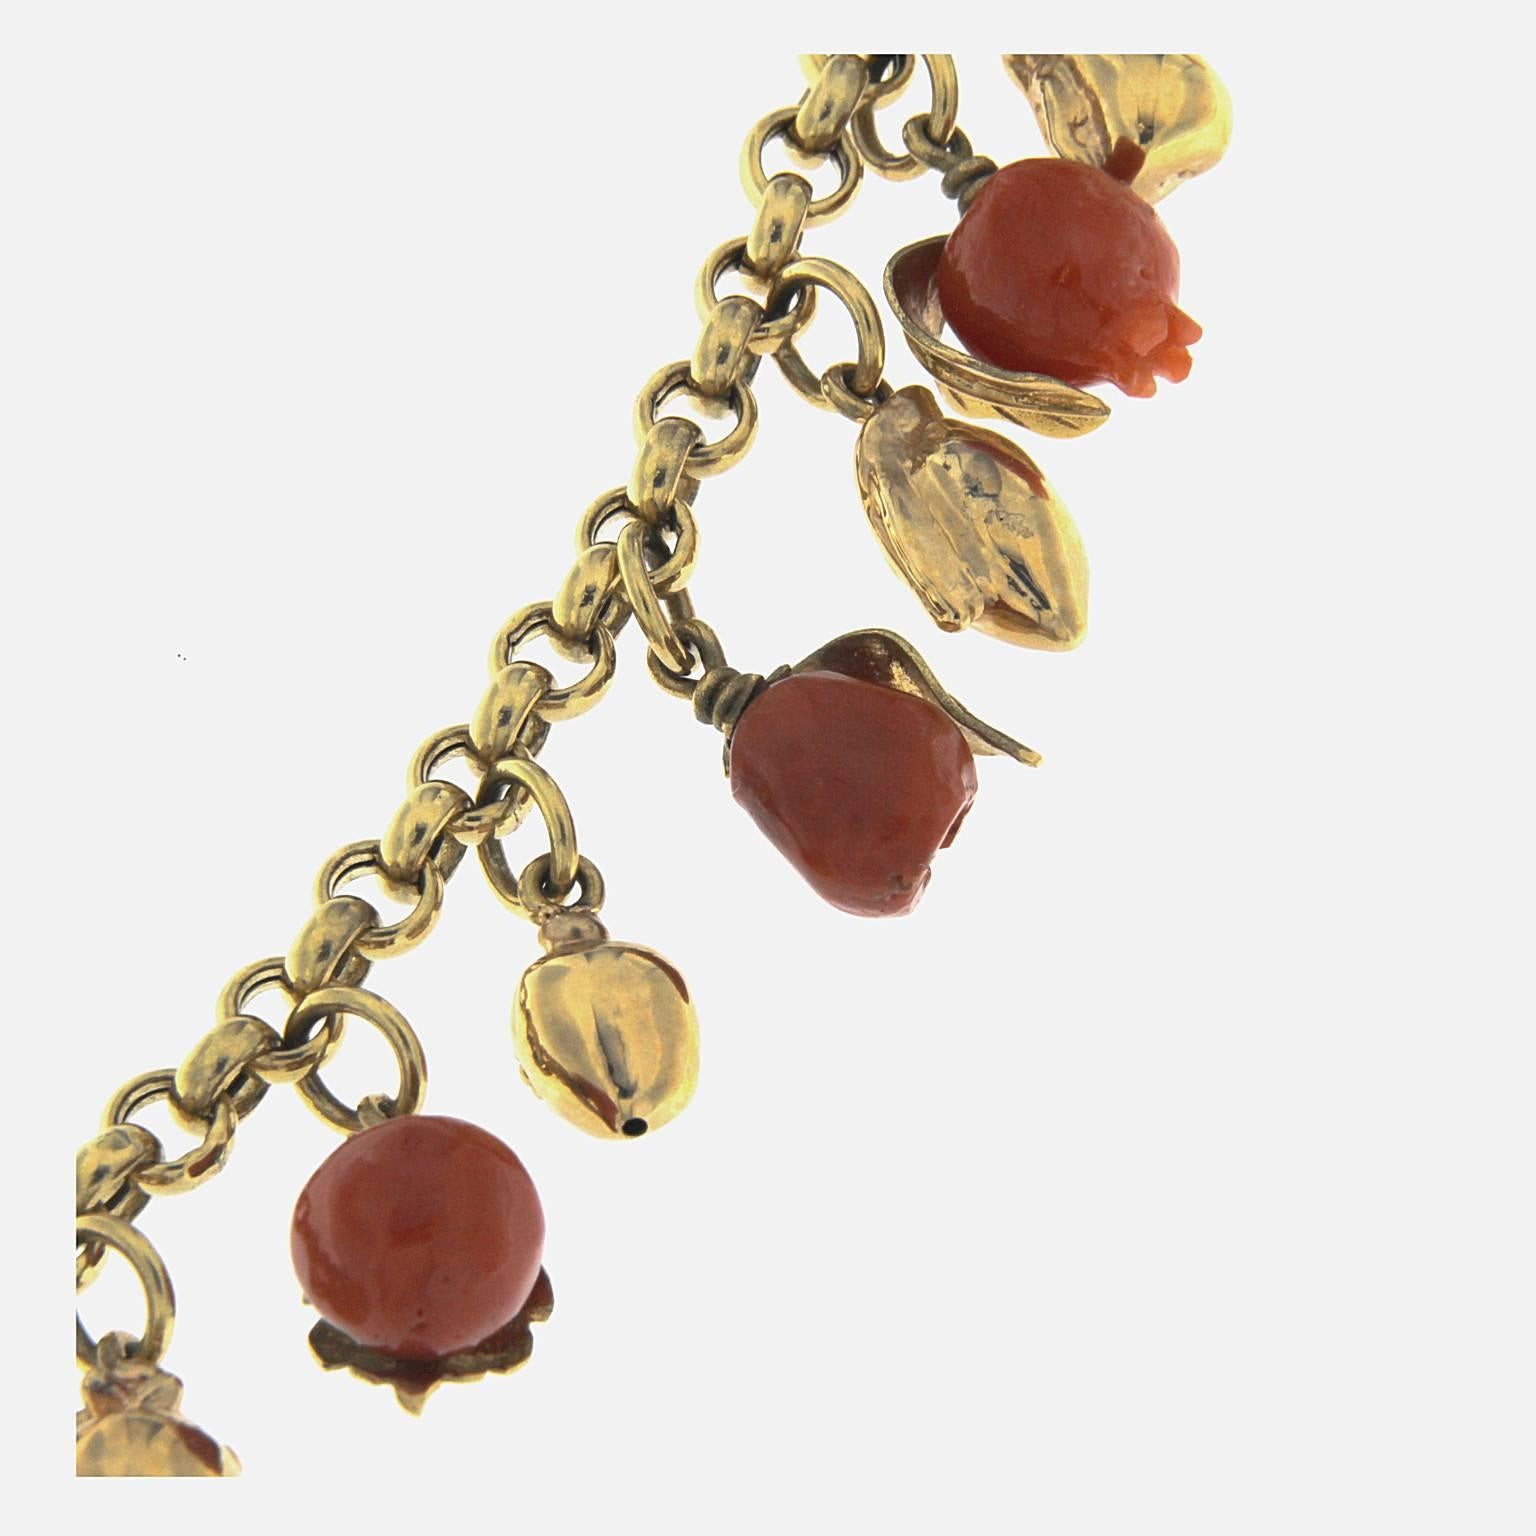 Coral and 18kt yellow gold fruit necklace

Total weight of 18 kt gold: gr 31.00
Total weight of red coral: gr 7.40
Stamp: 10 MI, 750, ITALY